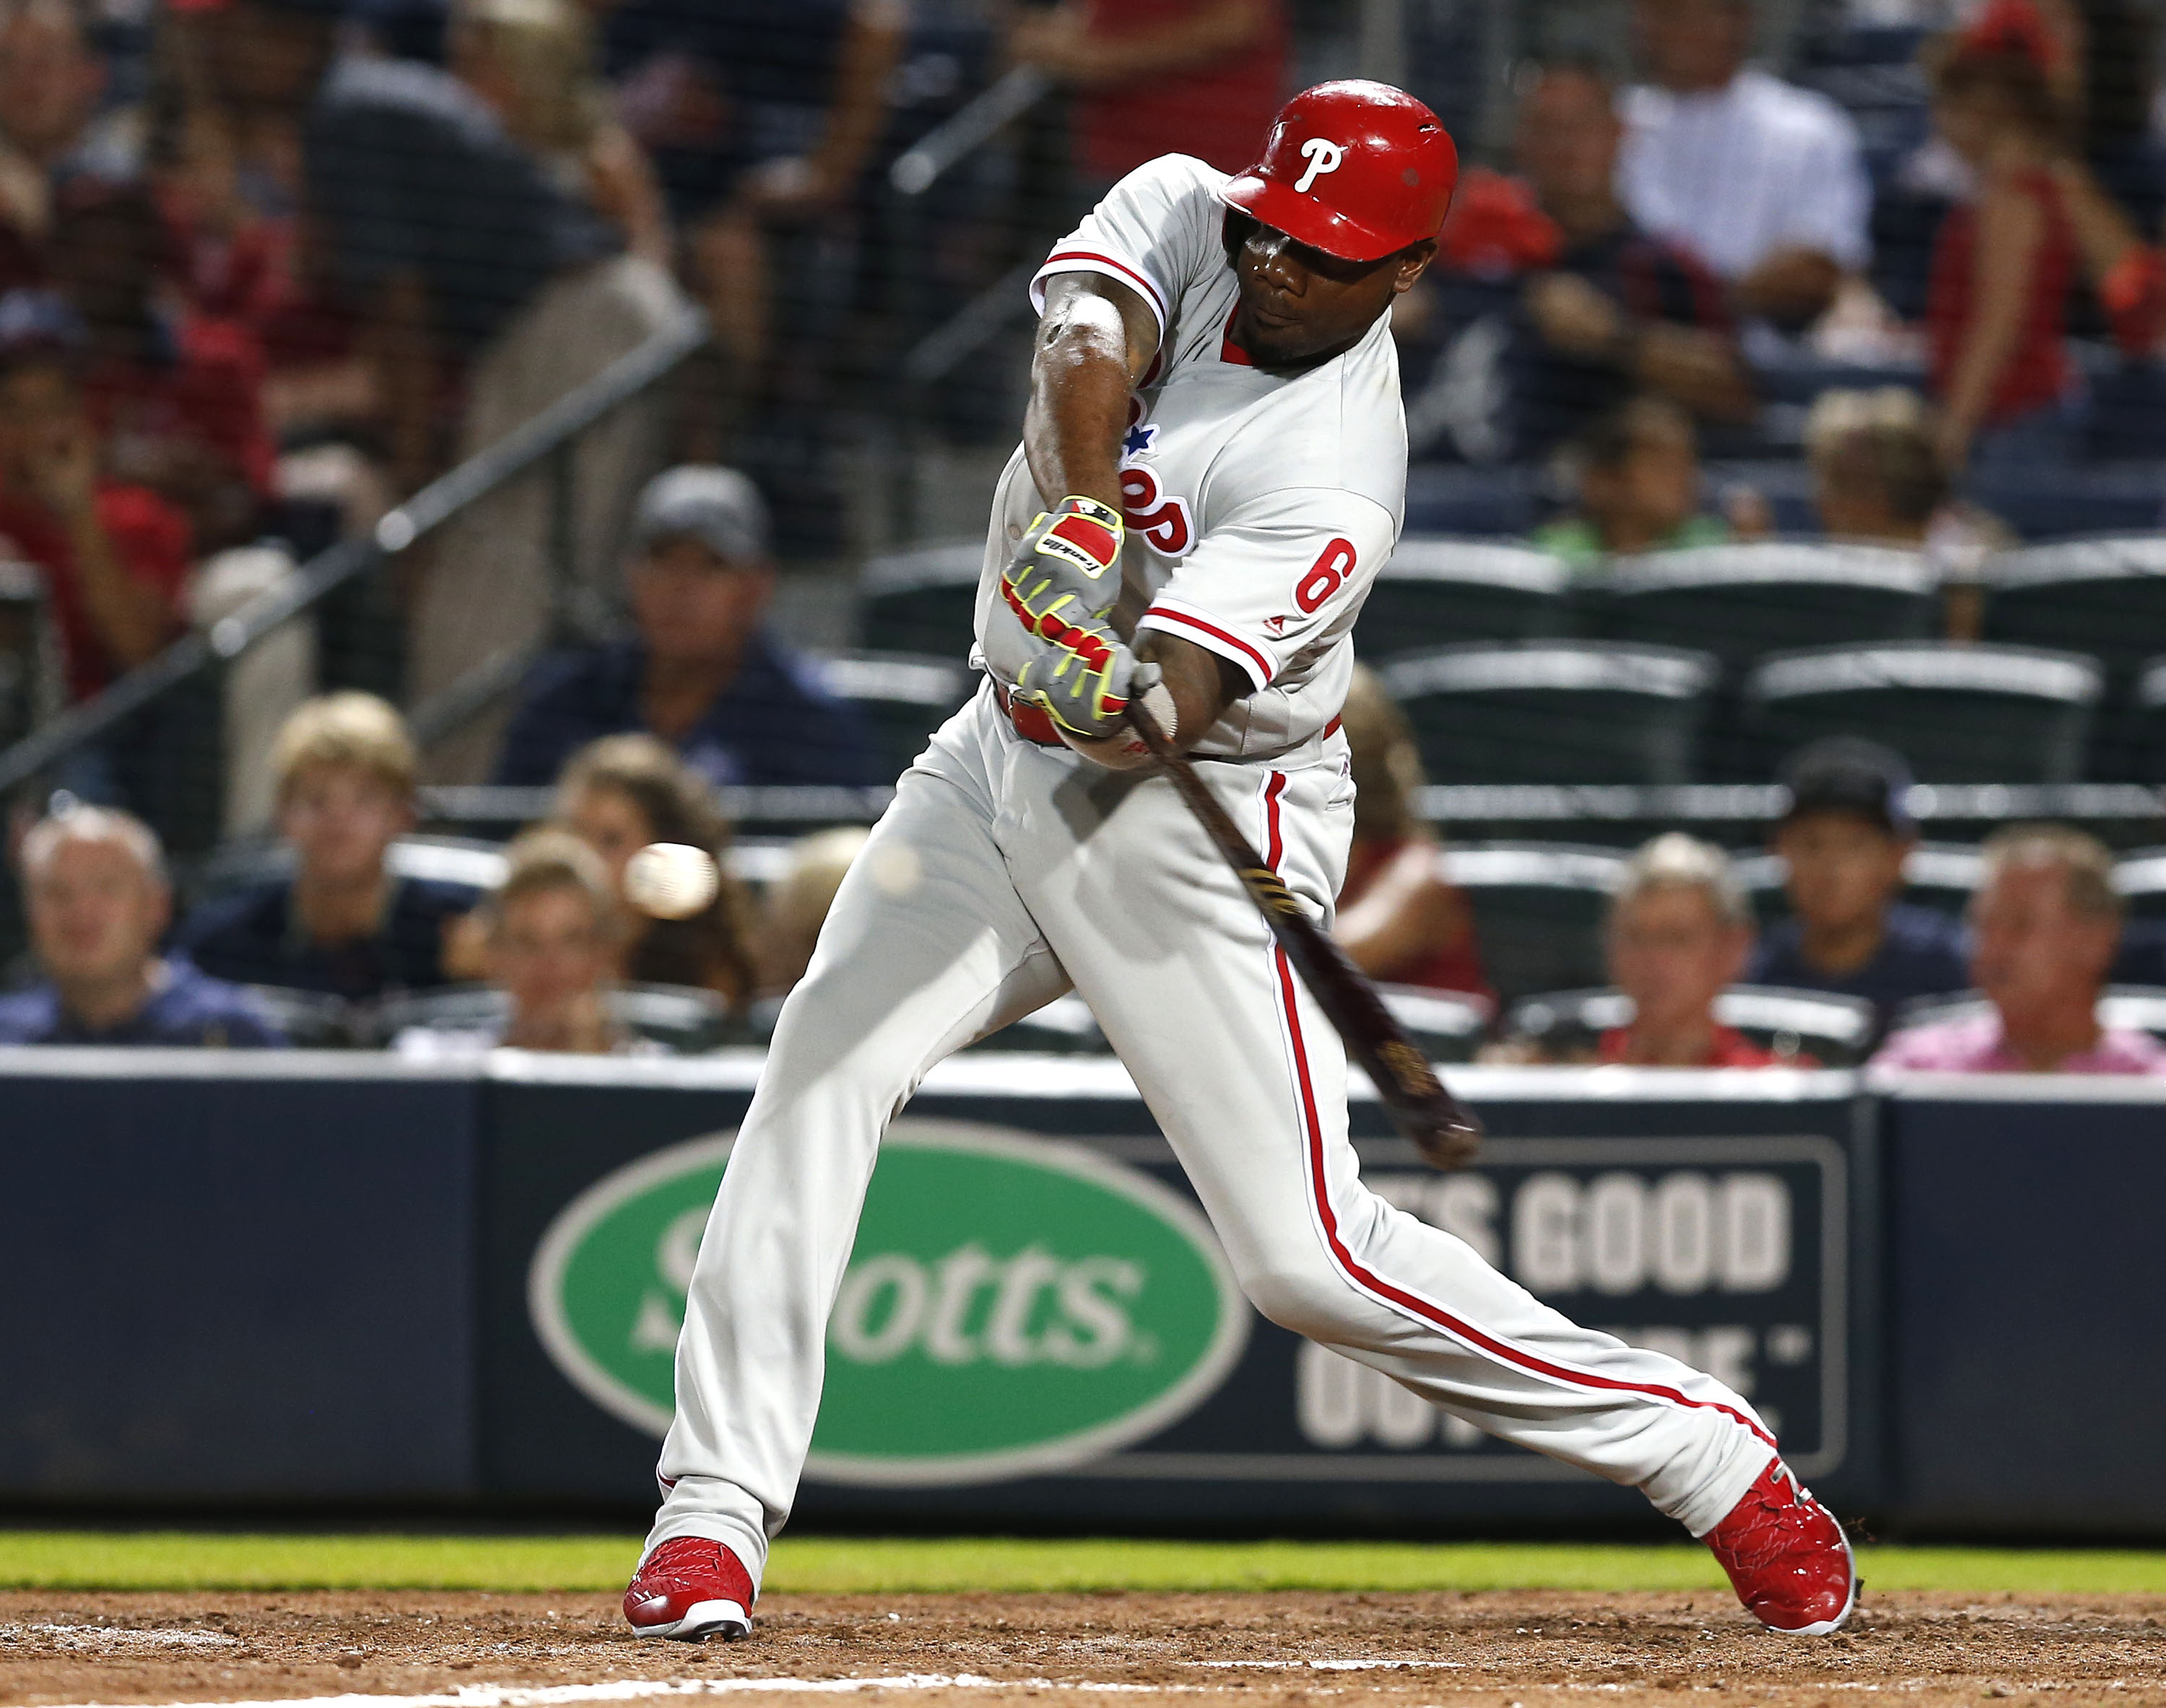 Rockies: Ryan Howard gets another chance, could help in October